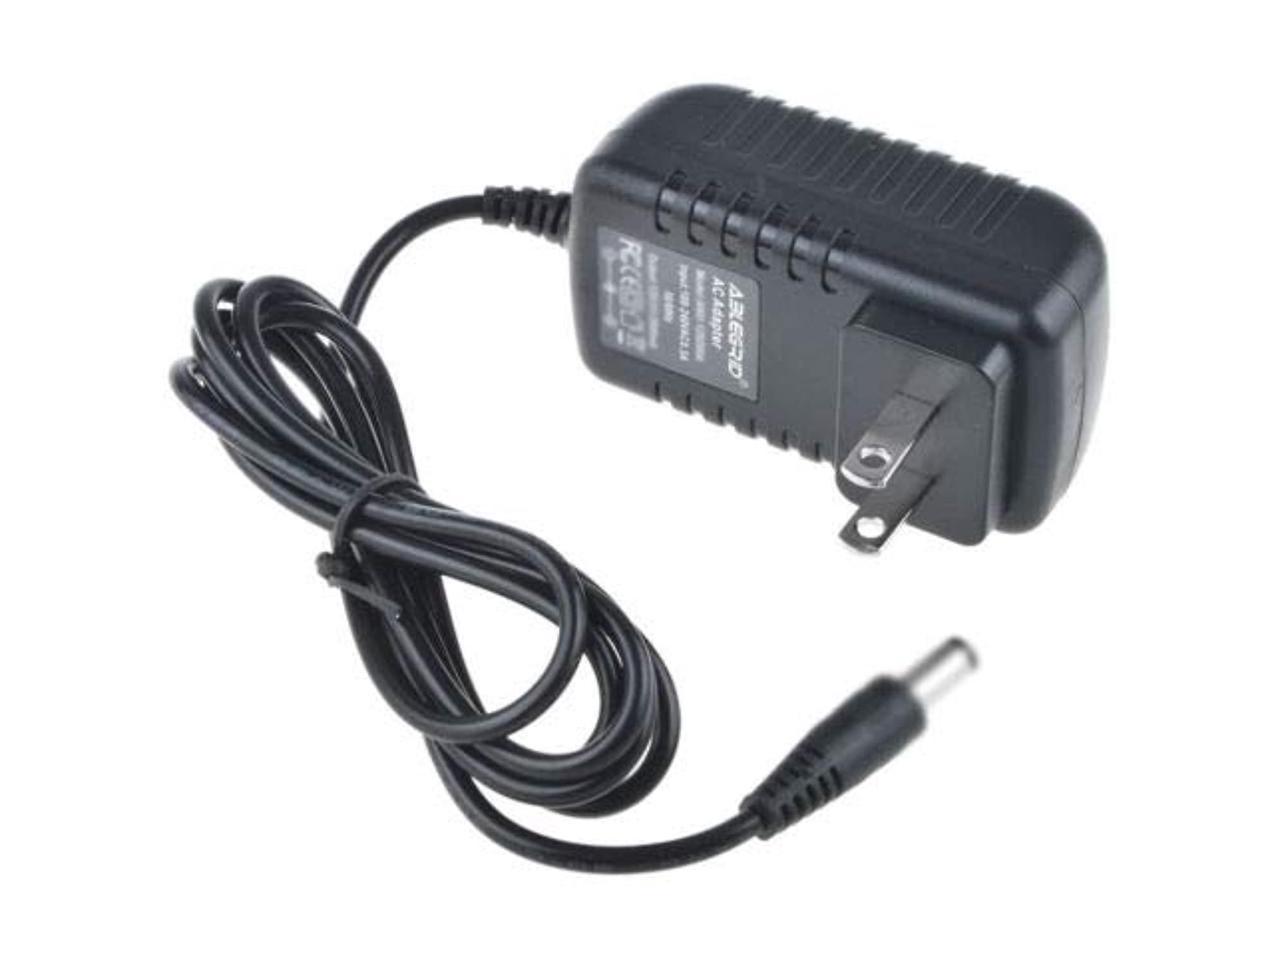 DC 6 Volt Battery Charger for Moultrie Feeders Game Trail Hunting Camera BC6 